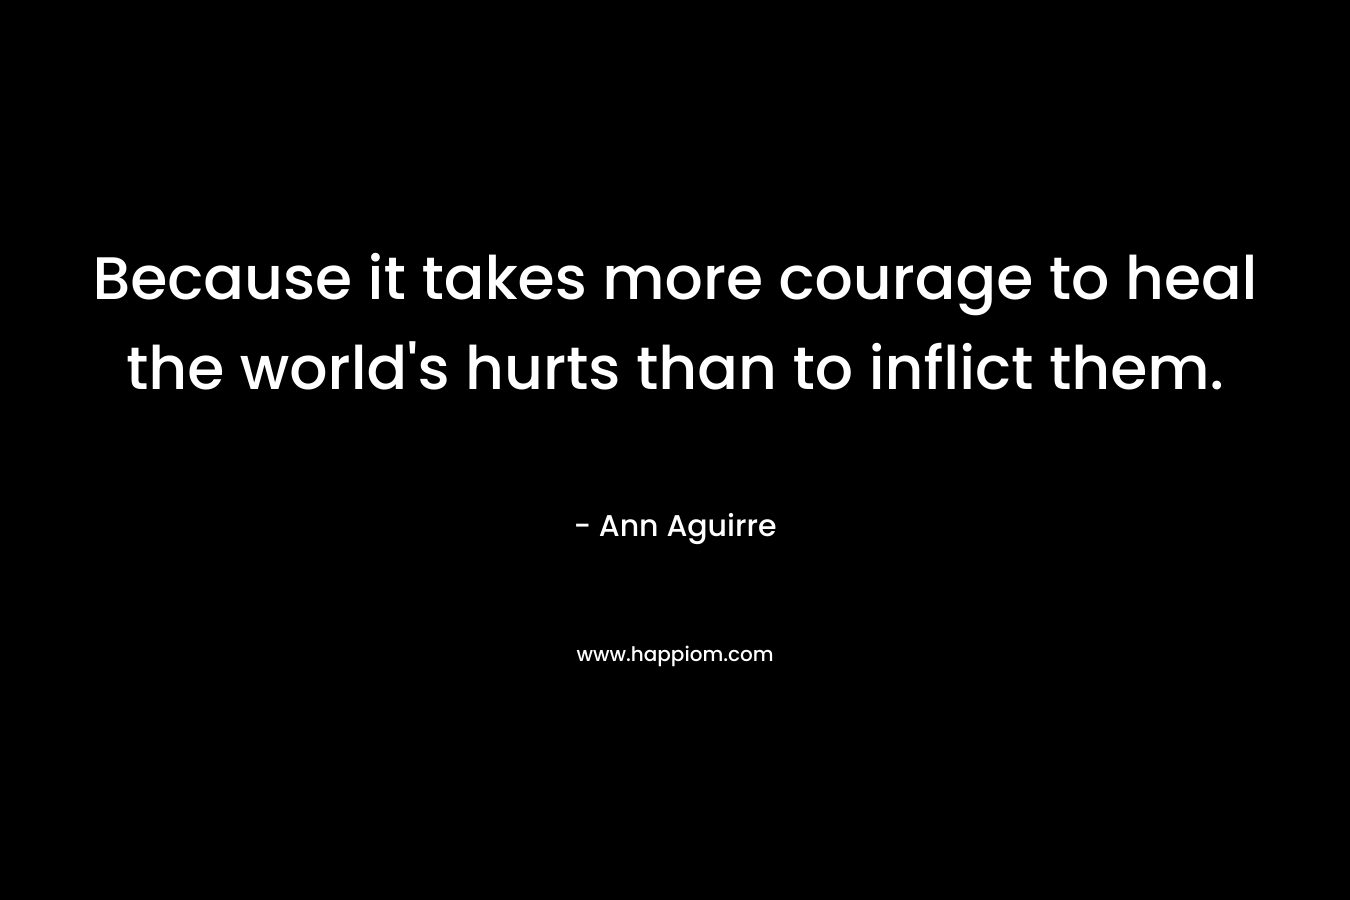 Because it takes more courage to heal the world's hurts than to inflict them.